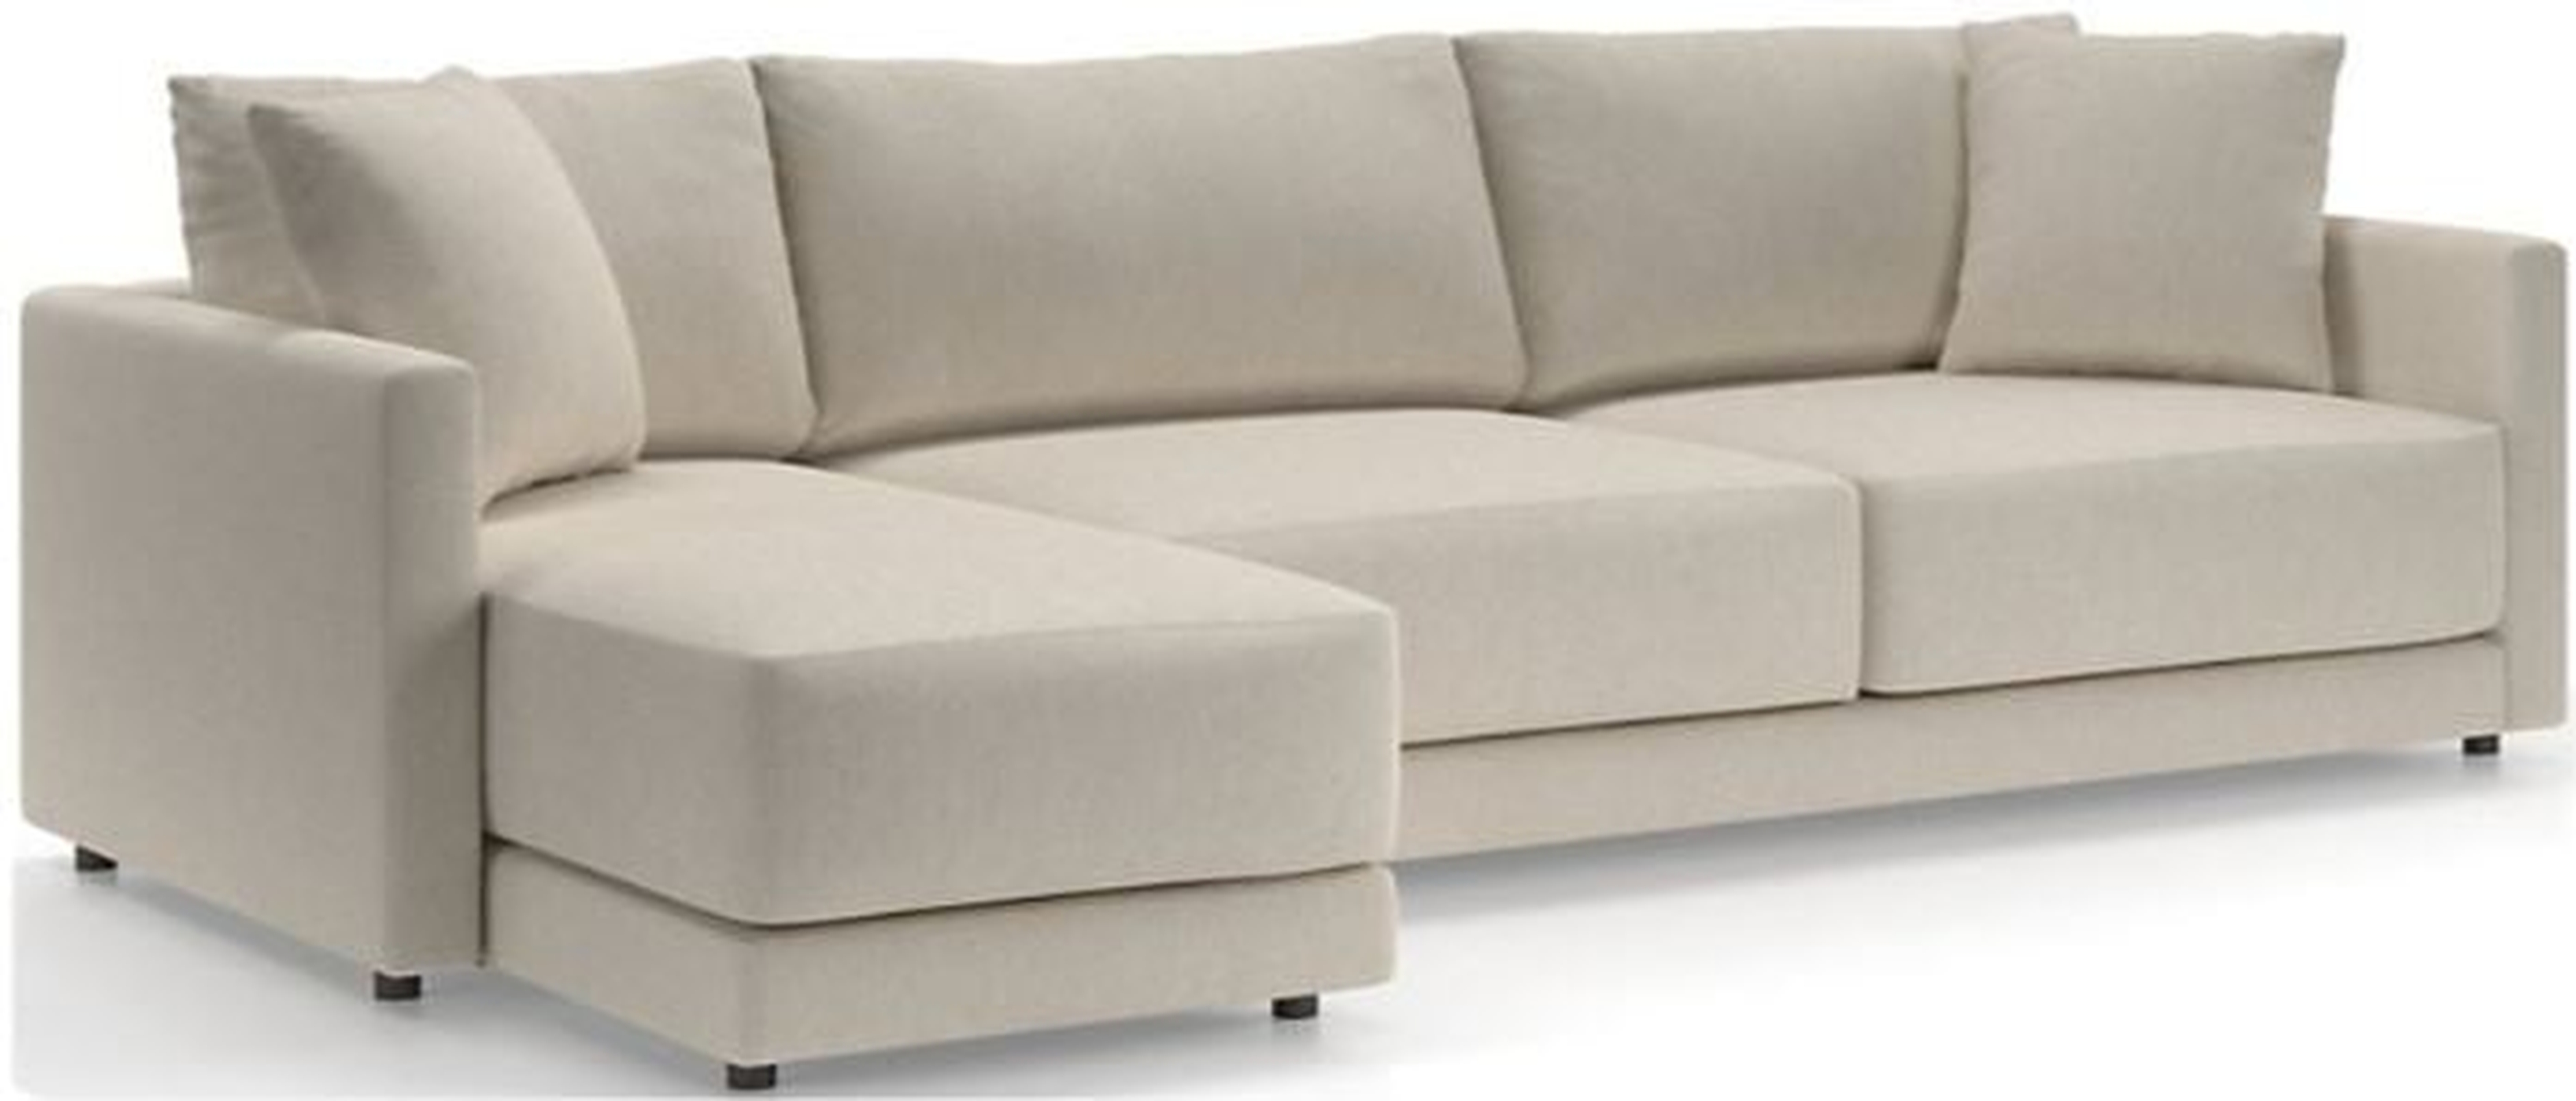 Gather 2-Piece Left Arm Chaise Sectional Icon Pearl - Crate and Barrel